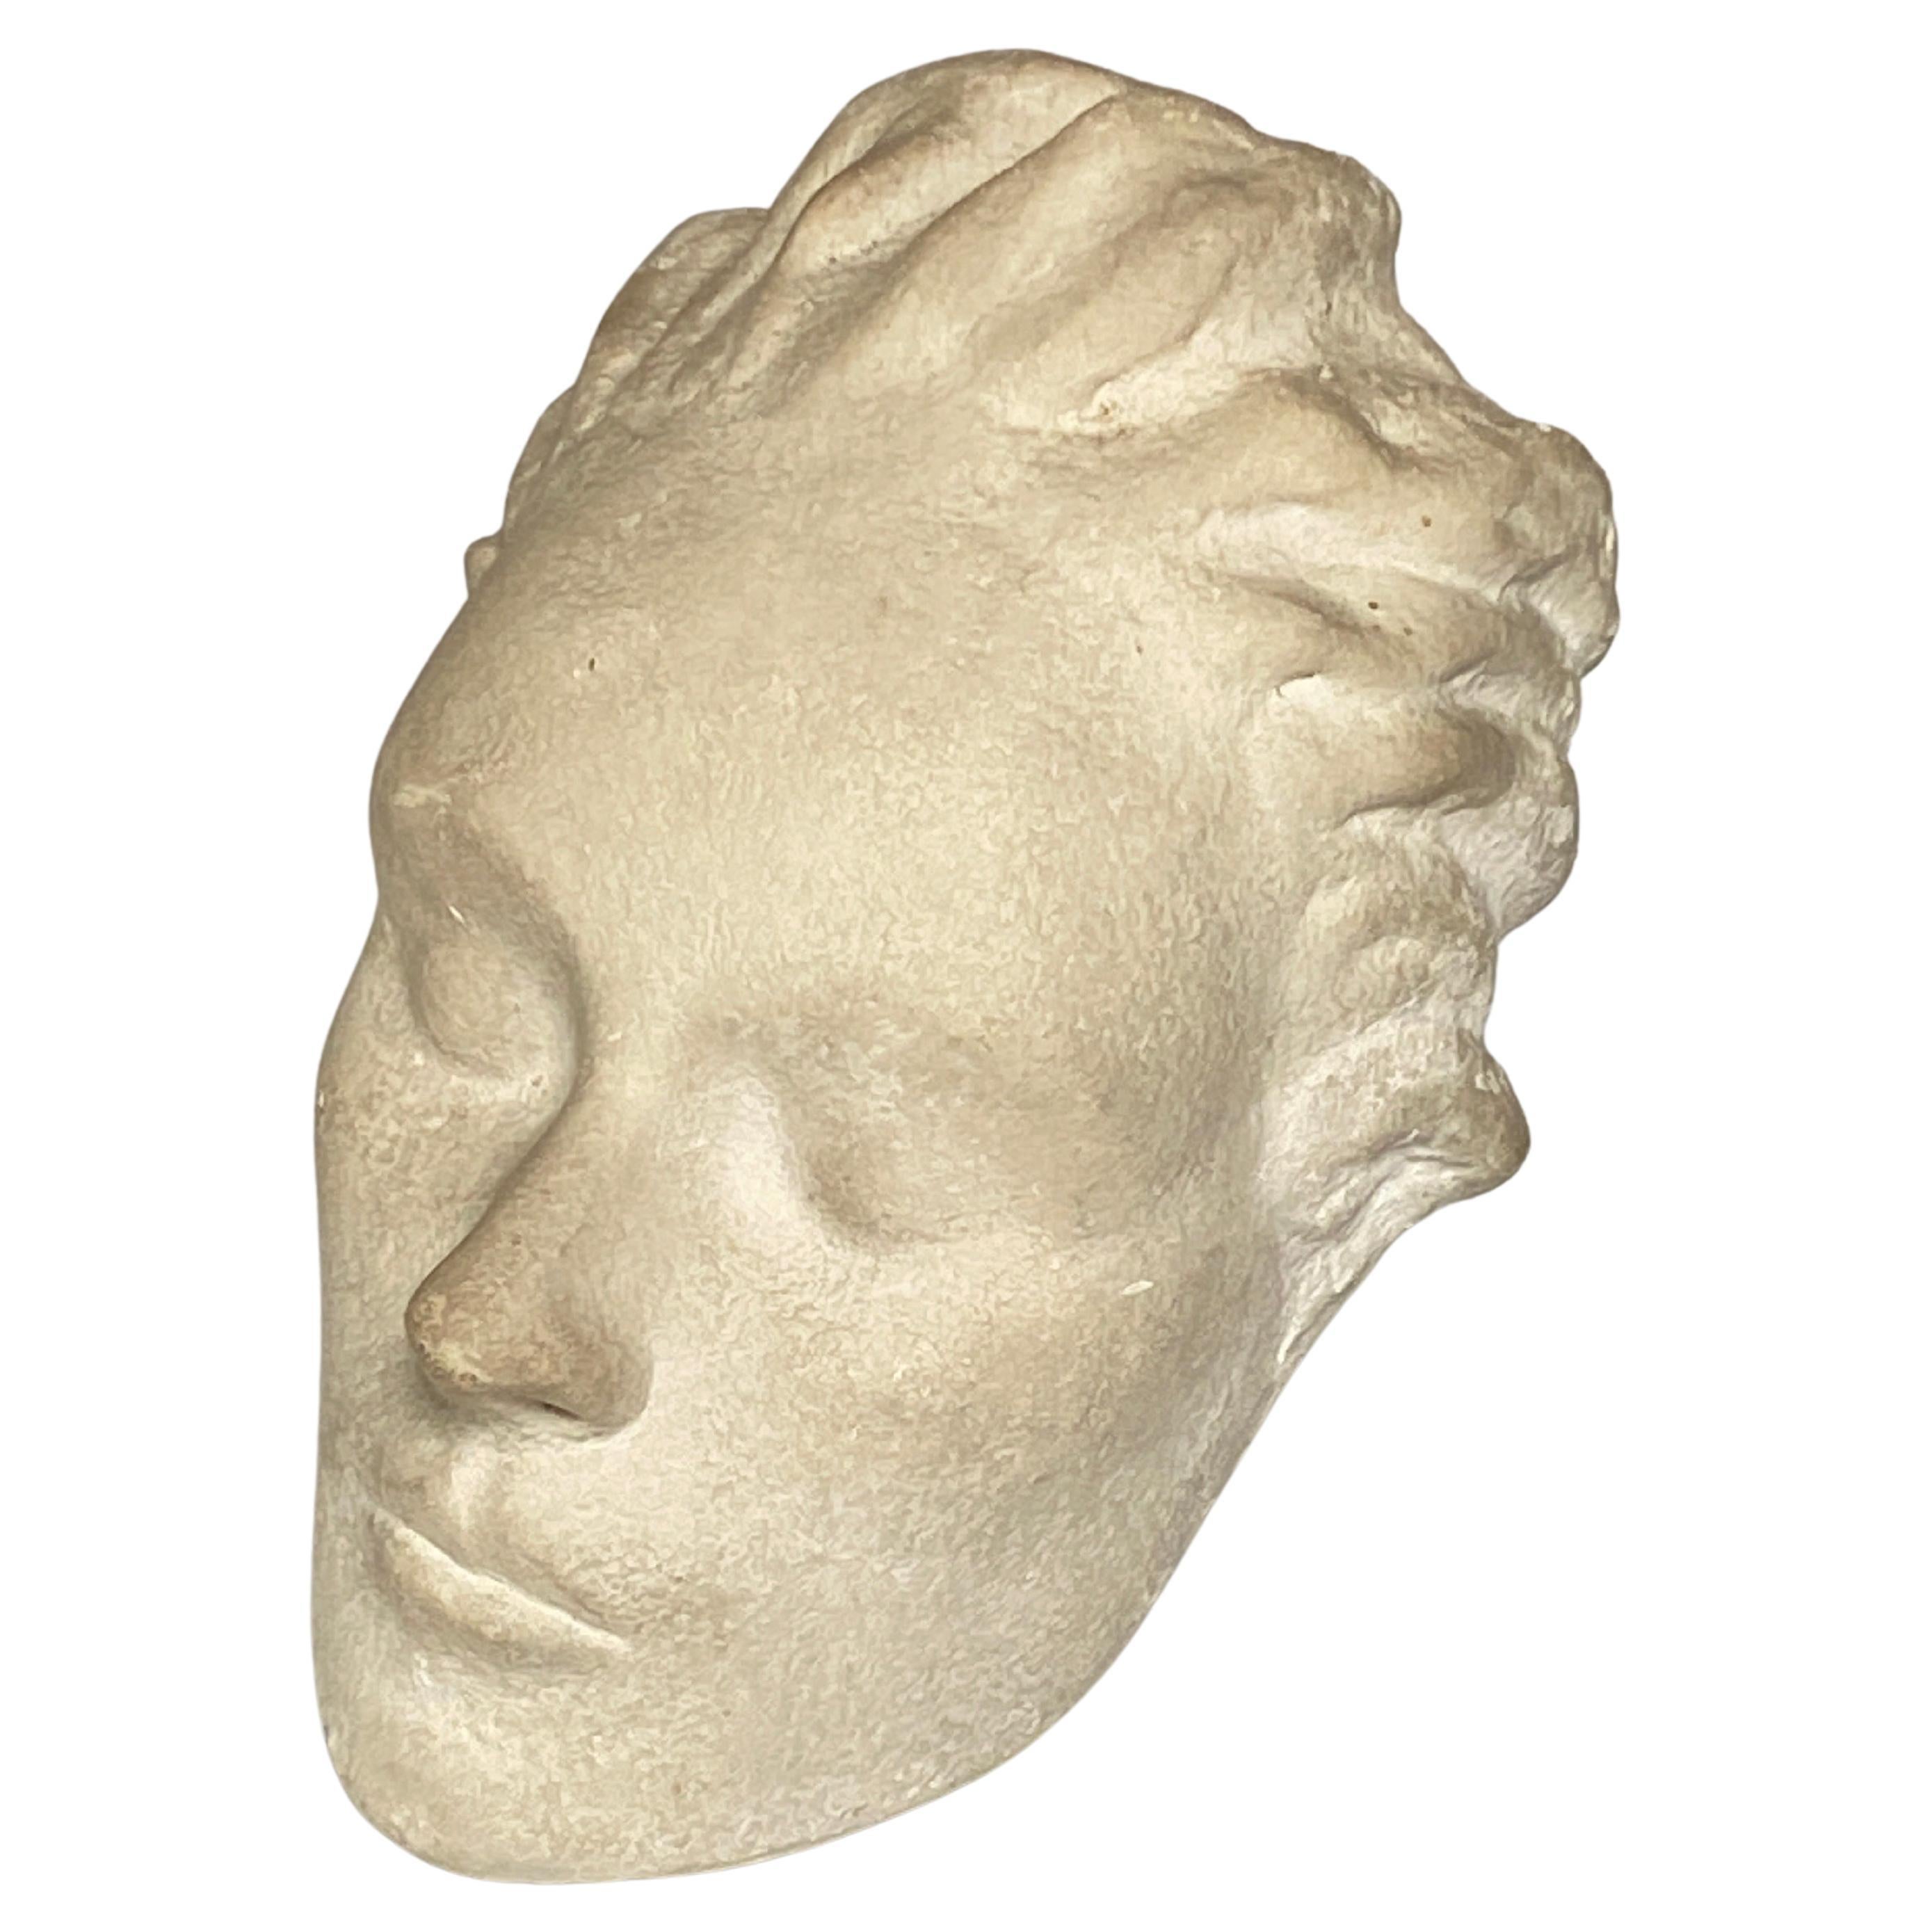 This is an Art Deco Period, Sculpture in stone, representing an women Head.
In a white color. It has been made in France Circa 1940.